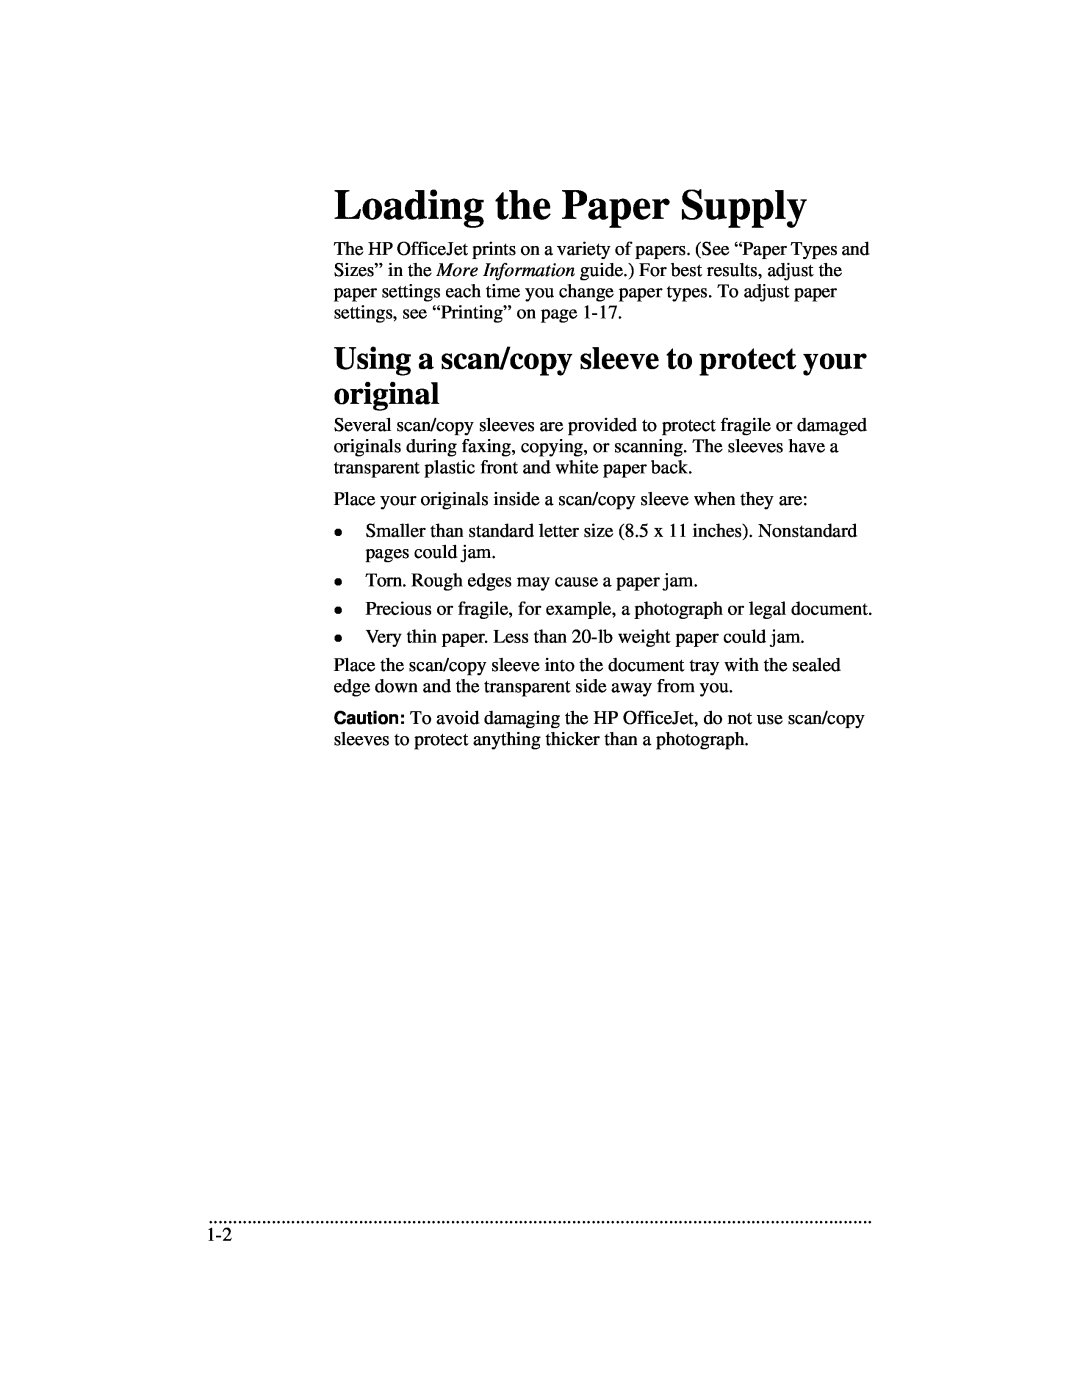 HP 700 manual Loading the Paper Supply, Using a scan/copy sleeve to protect your original 